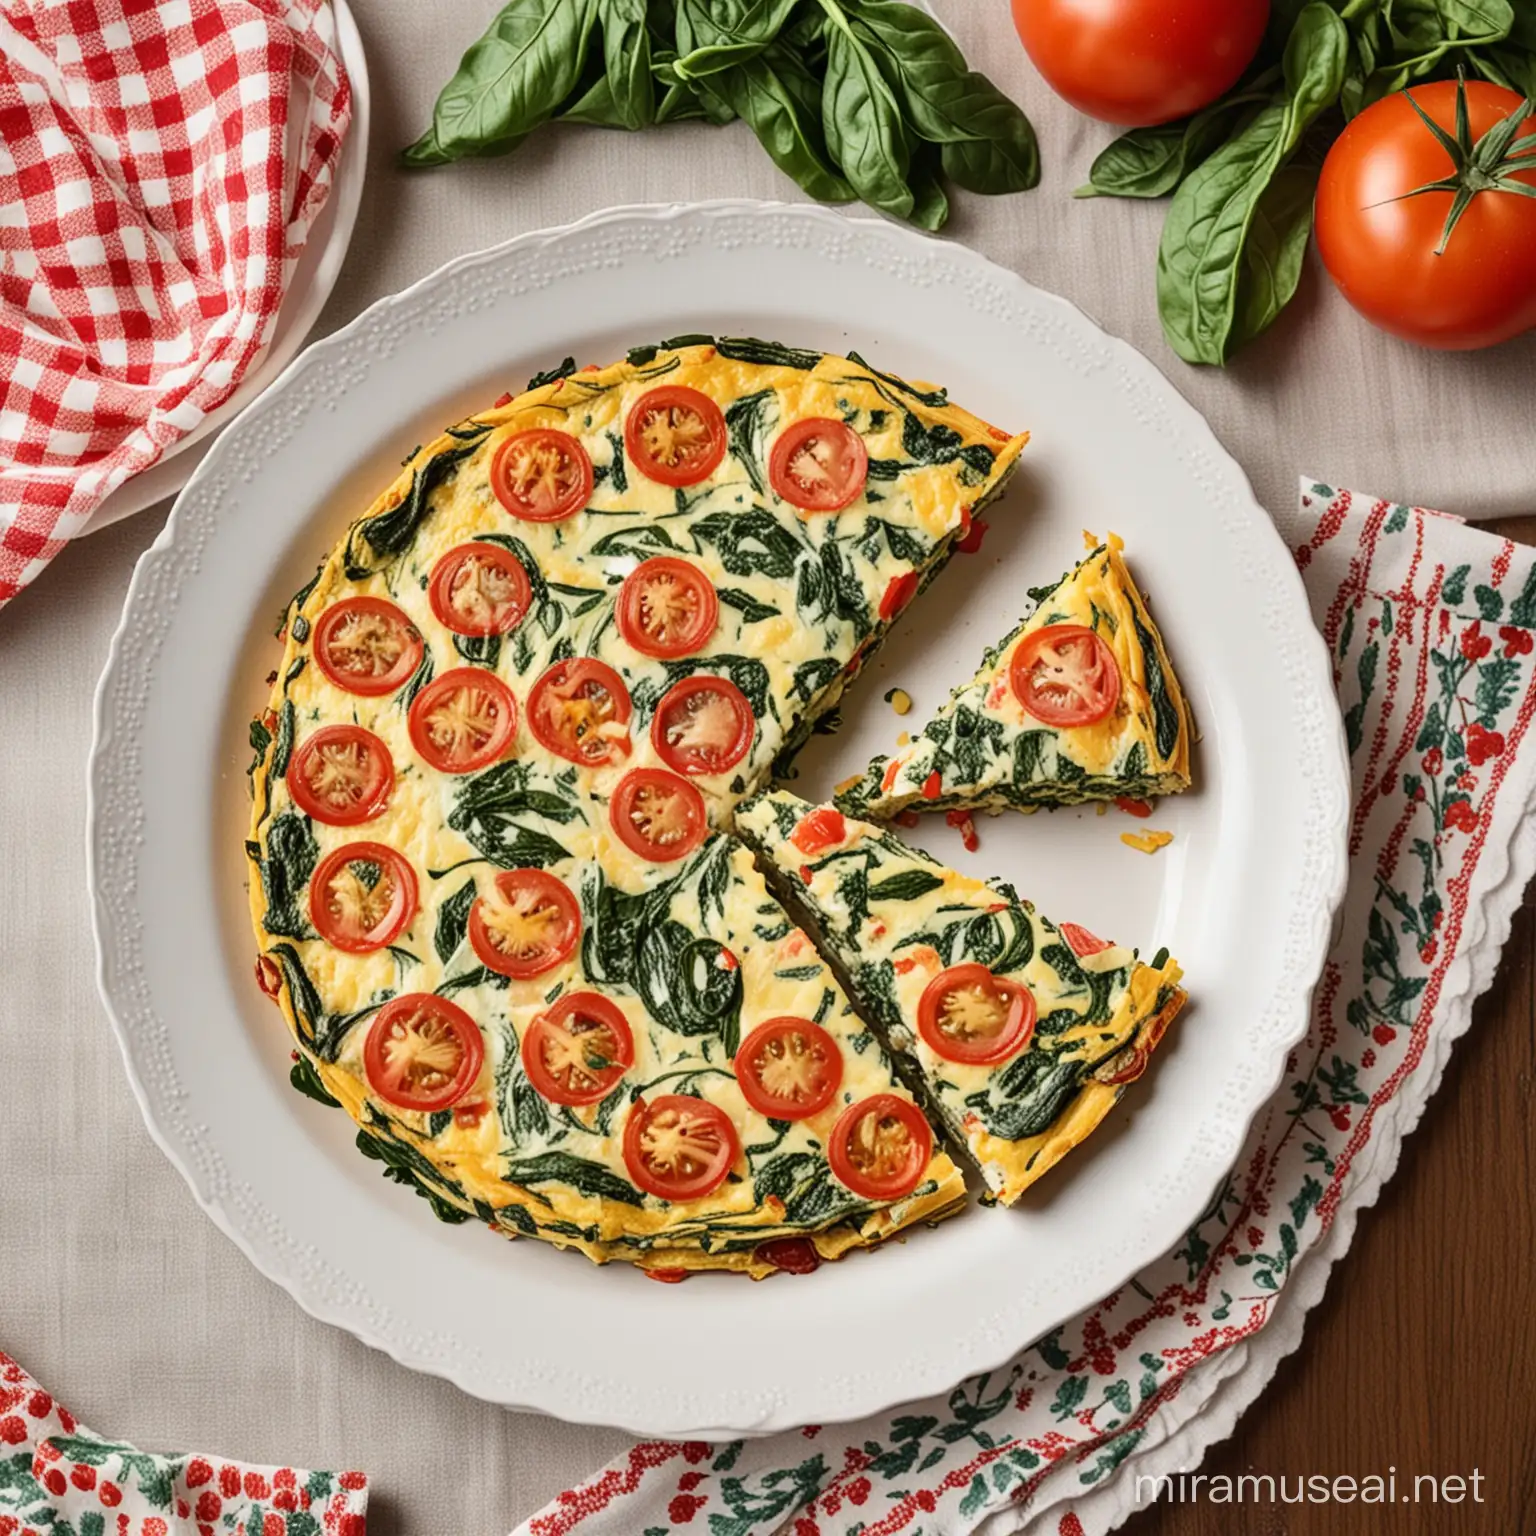 Delicious Spinach and Tomato Frittata Plated on Elegant Tablecloth